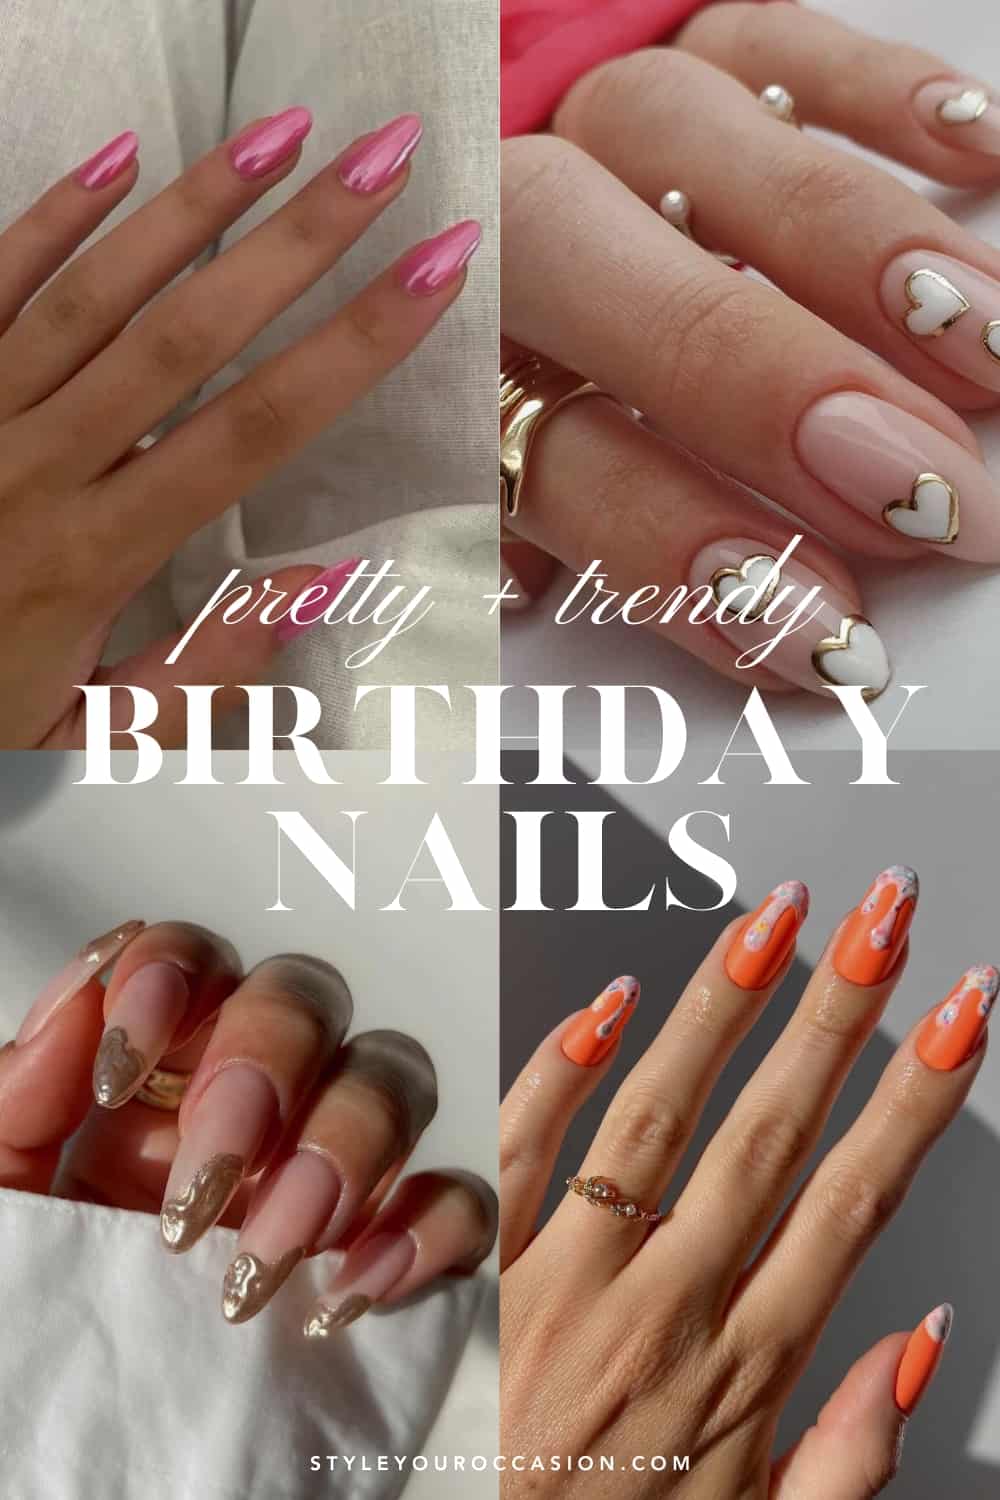 collage of four hands with pretty birthday nails designs with glitter, hearts, and sprinkles